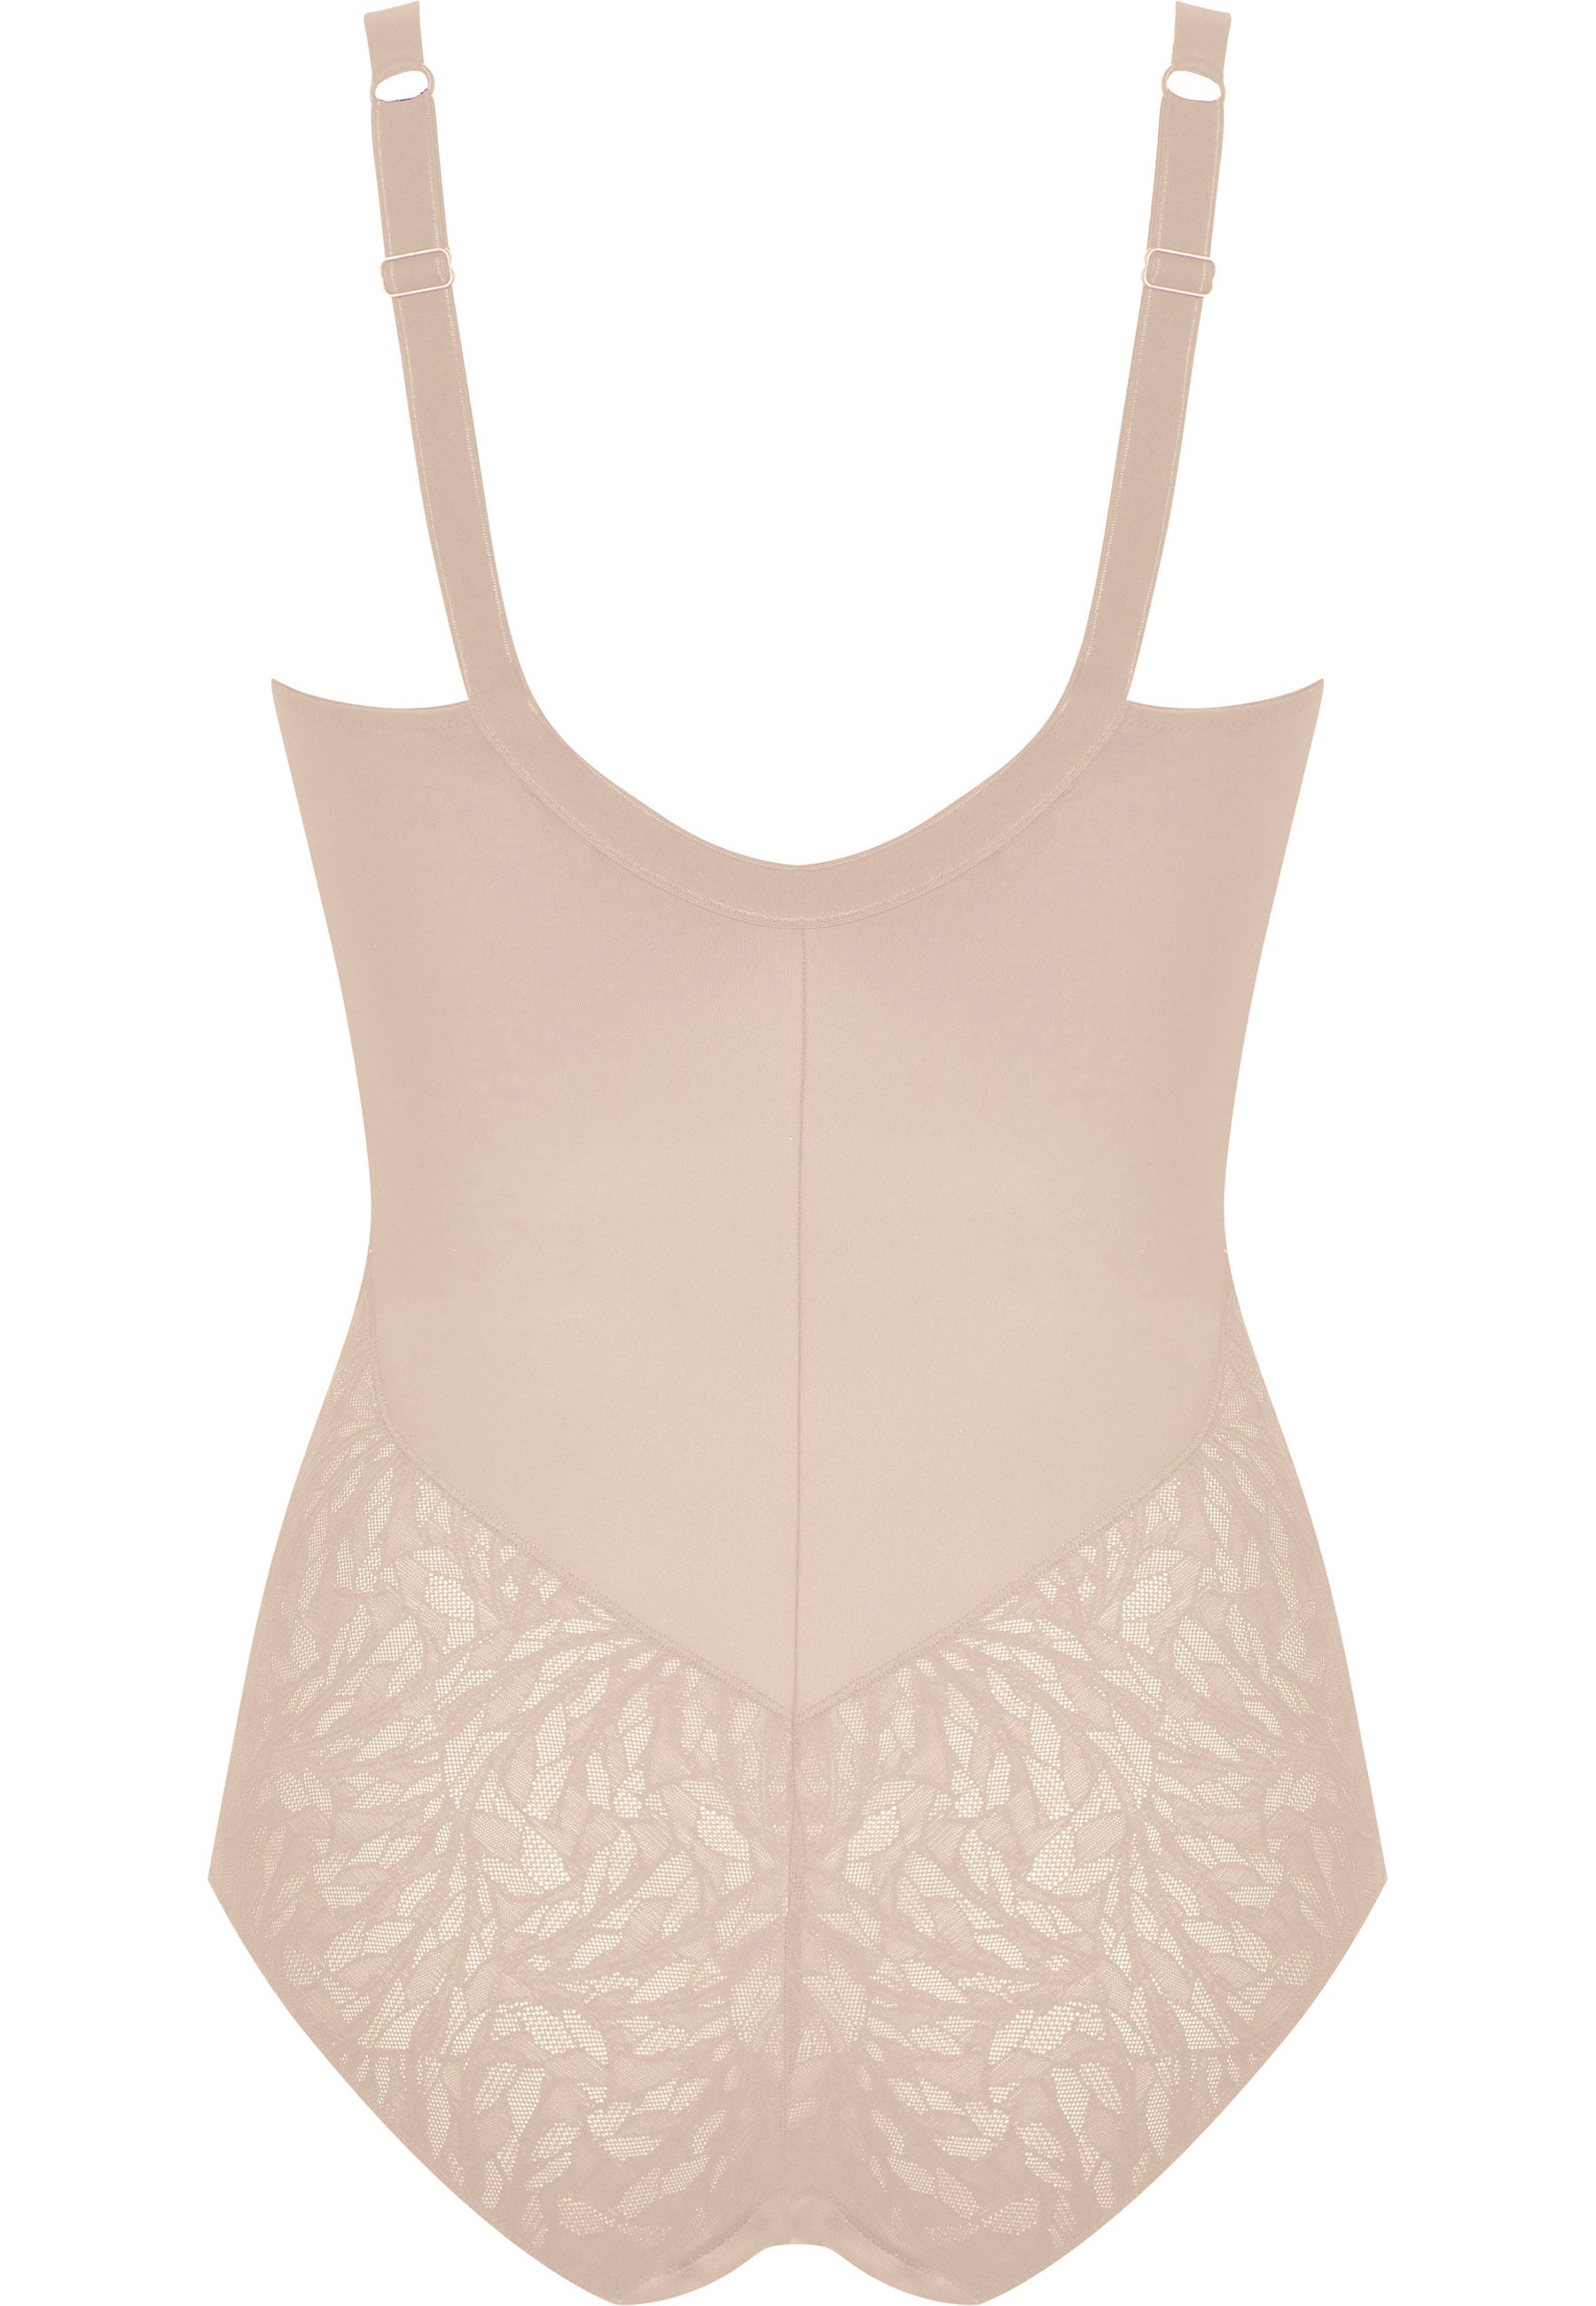 Minimized Body with Lace - Light Beige